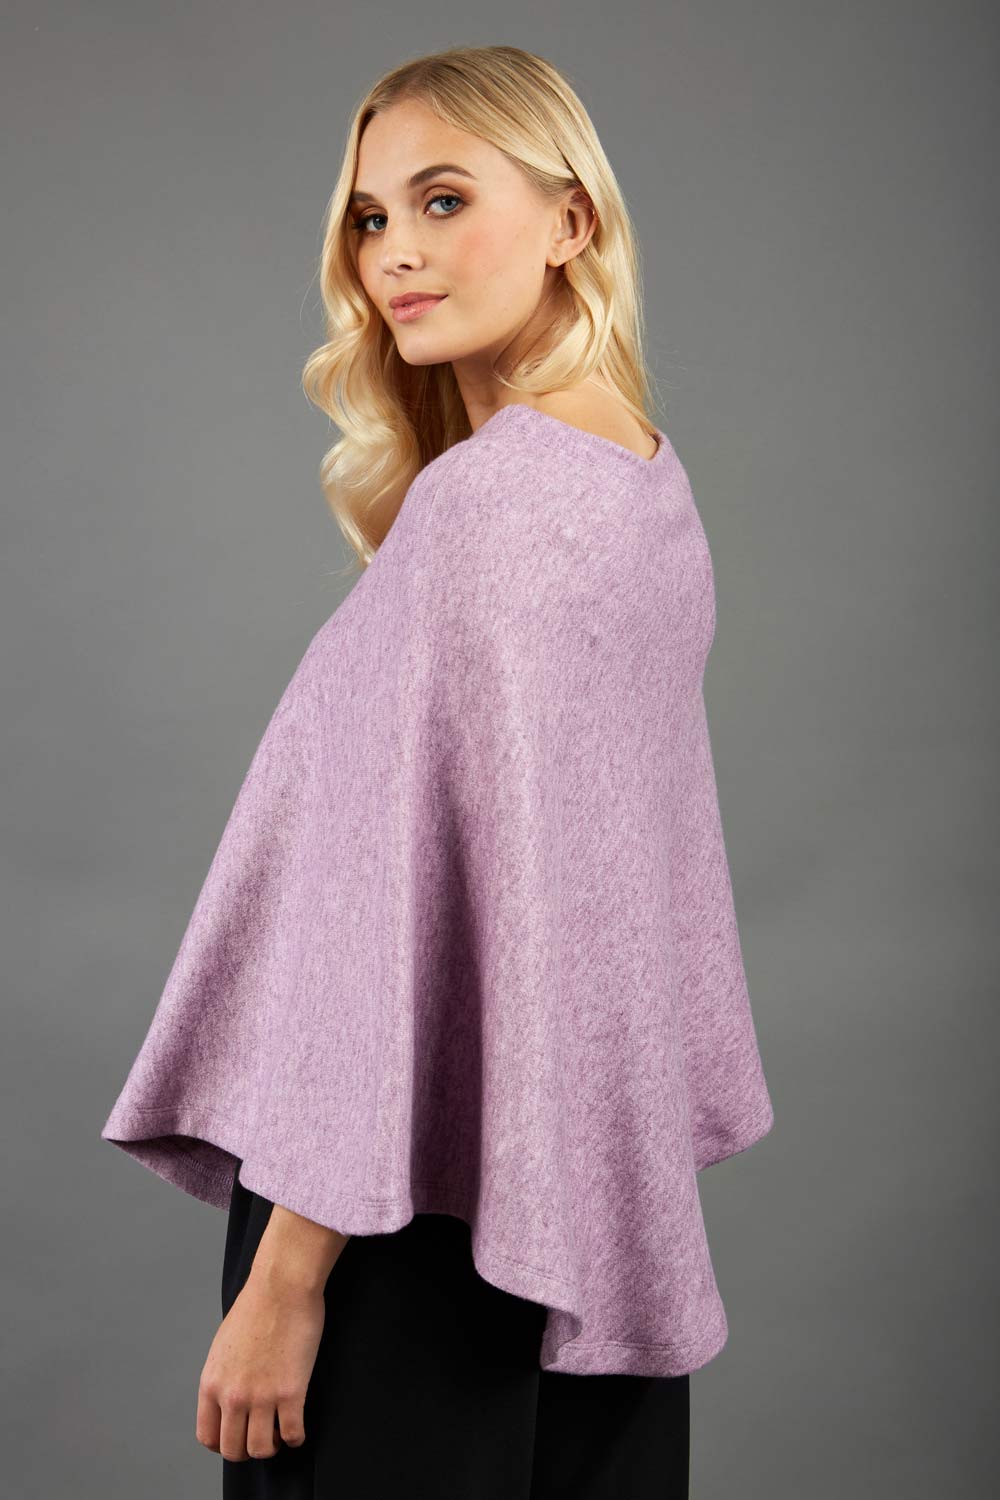 blonde model wearing diva catwalk rosalia poncho made in very cosy soft cashmere fabric in pink side